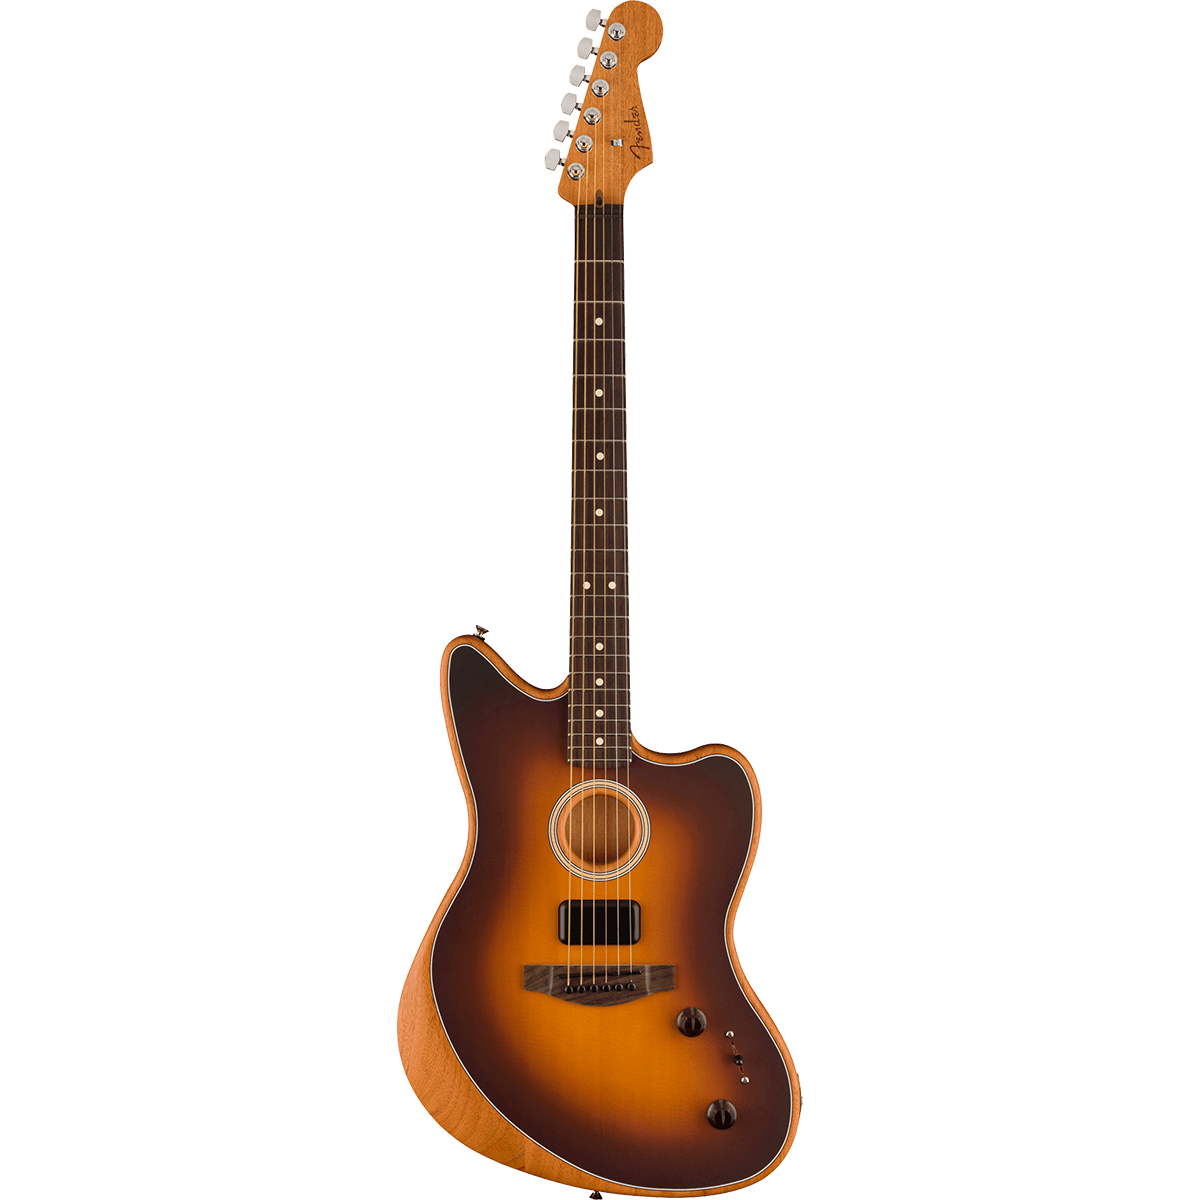 Acoustasonic Player Jazzmaster, Rosewood Fingerboard, 2-Color Sunburst - Guitars - Electro-Acoustic by Fender at Muso's Stuff